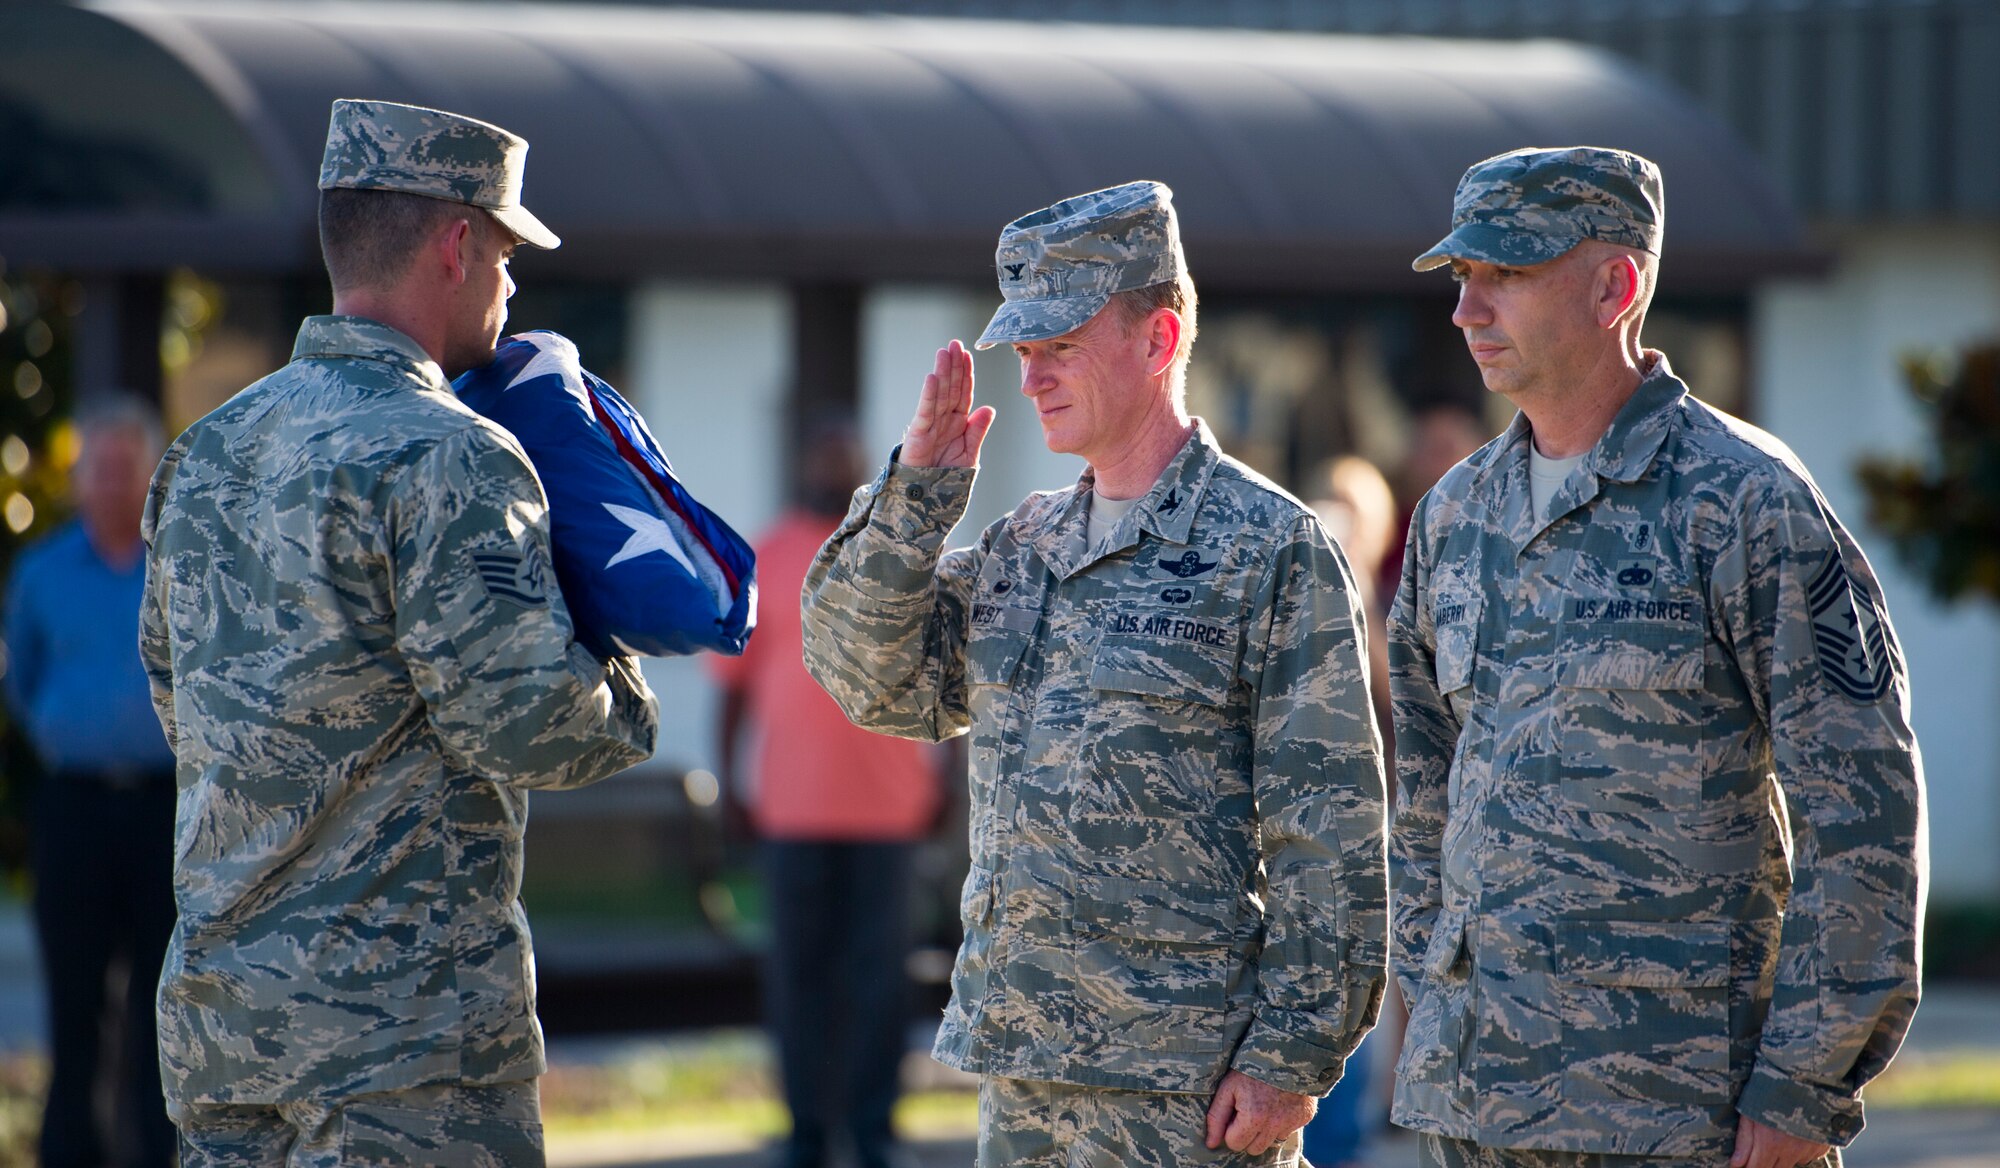 Col. Bill West, 1st Special Operations Wing commander, salutes the United States Flag during a retreat ceremony at Hurlburt Field, Fla., Oct. 8, 2014. The 1st SOW Wing Staff Agencies such as public affairs, legal, safety and finance conducted the retreat ceremony.  (U.S. Air Force photo/Senior Airman Krystal M. Garrett)